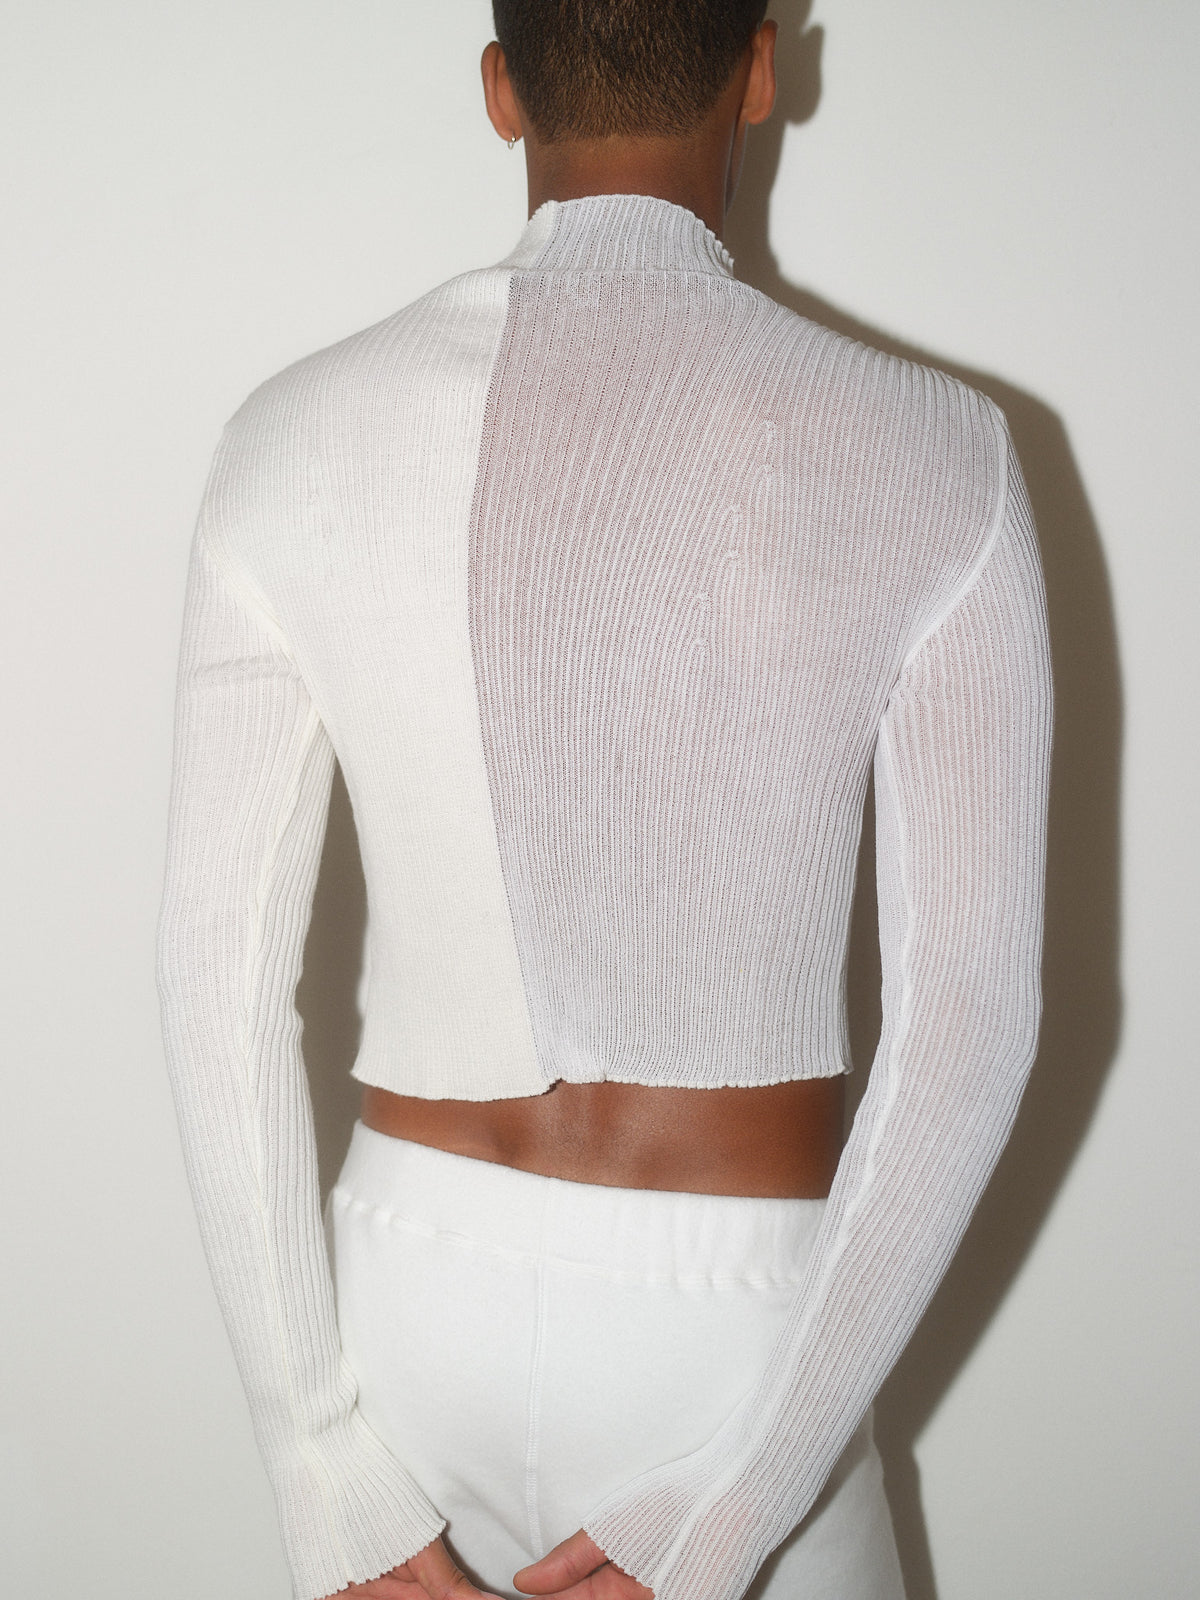 Knitted Draped Top designed by Christina Seewald. Sustainable, designed and made in Europe. Best Quality Yarns from Italy.